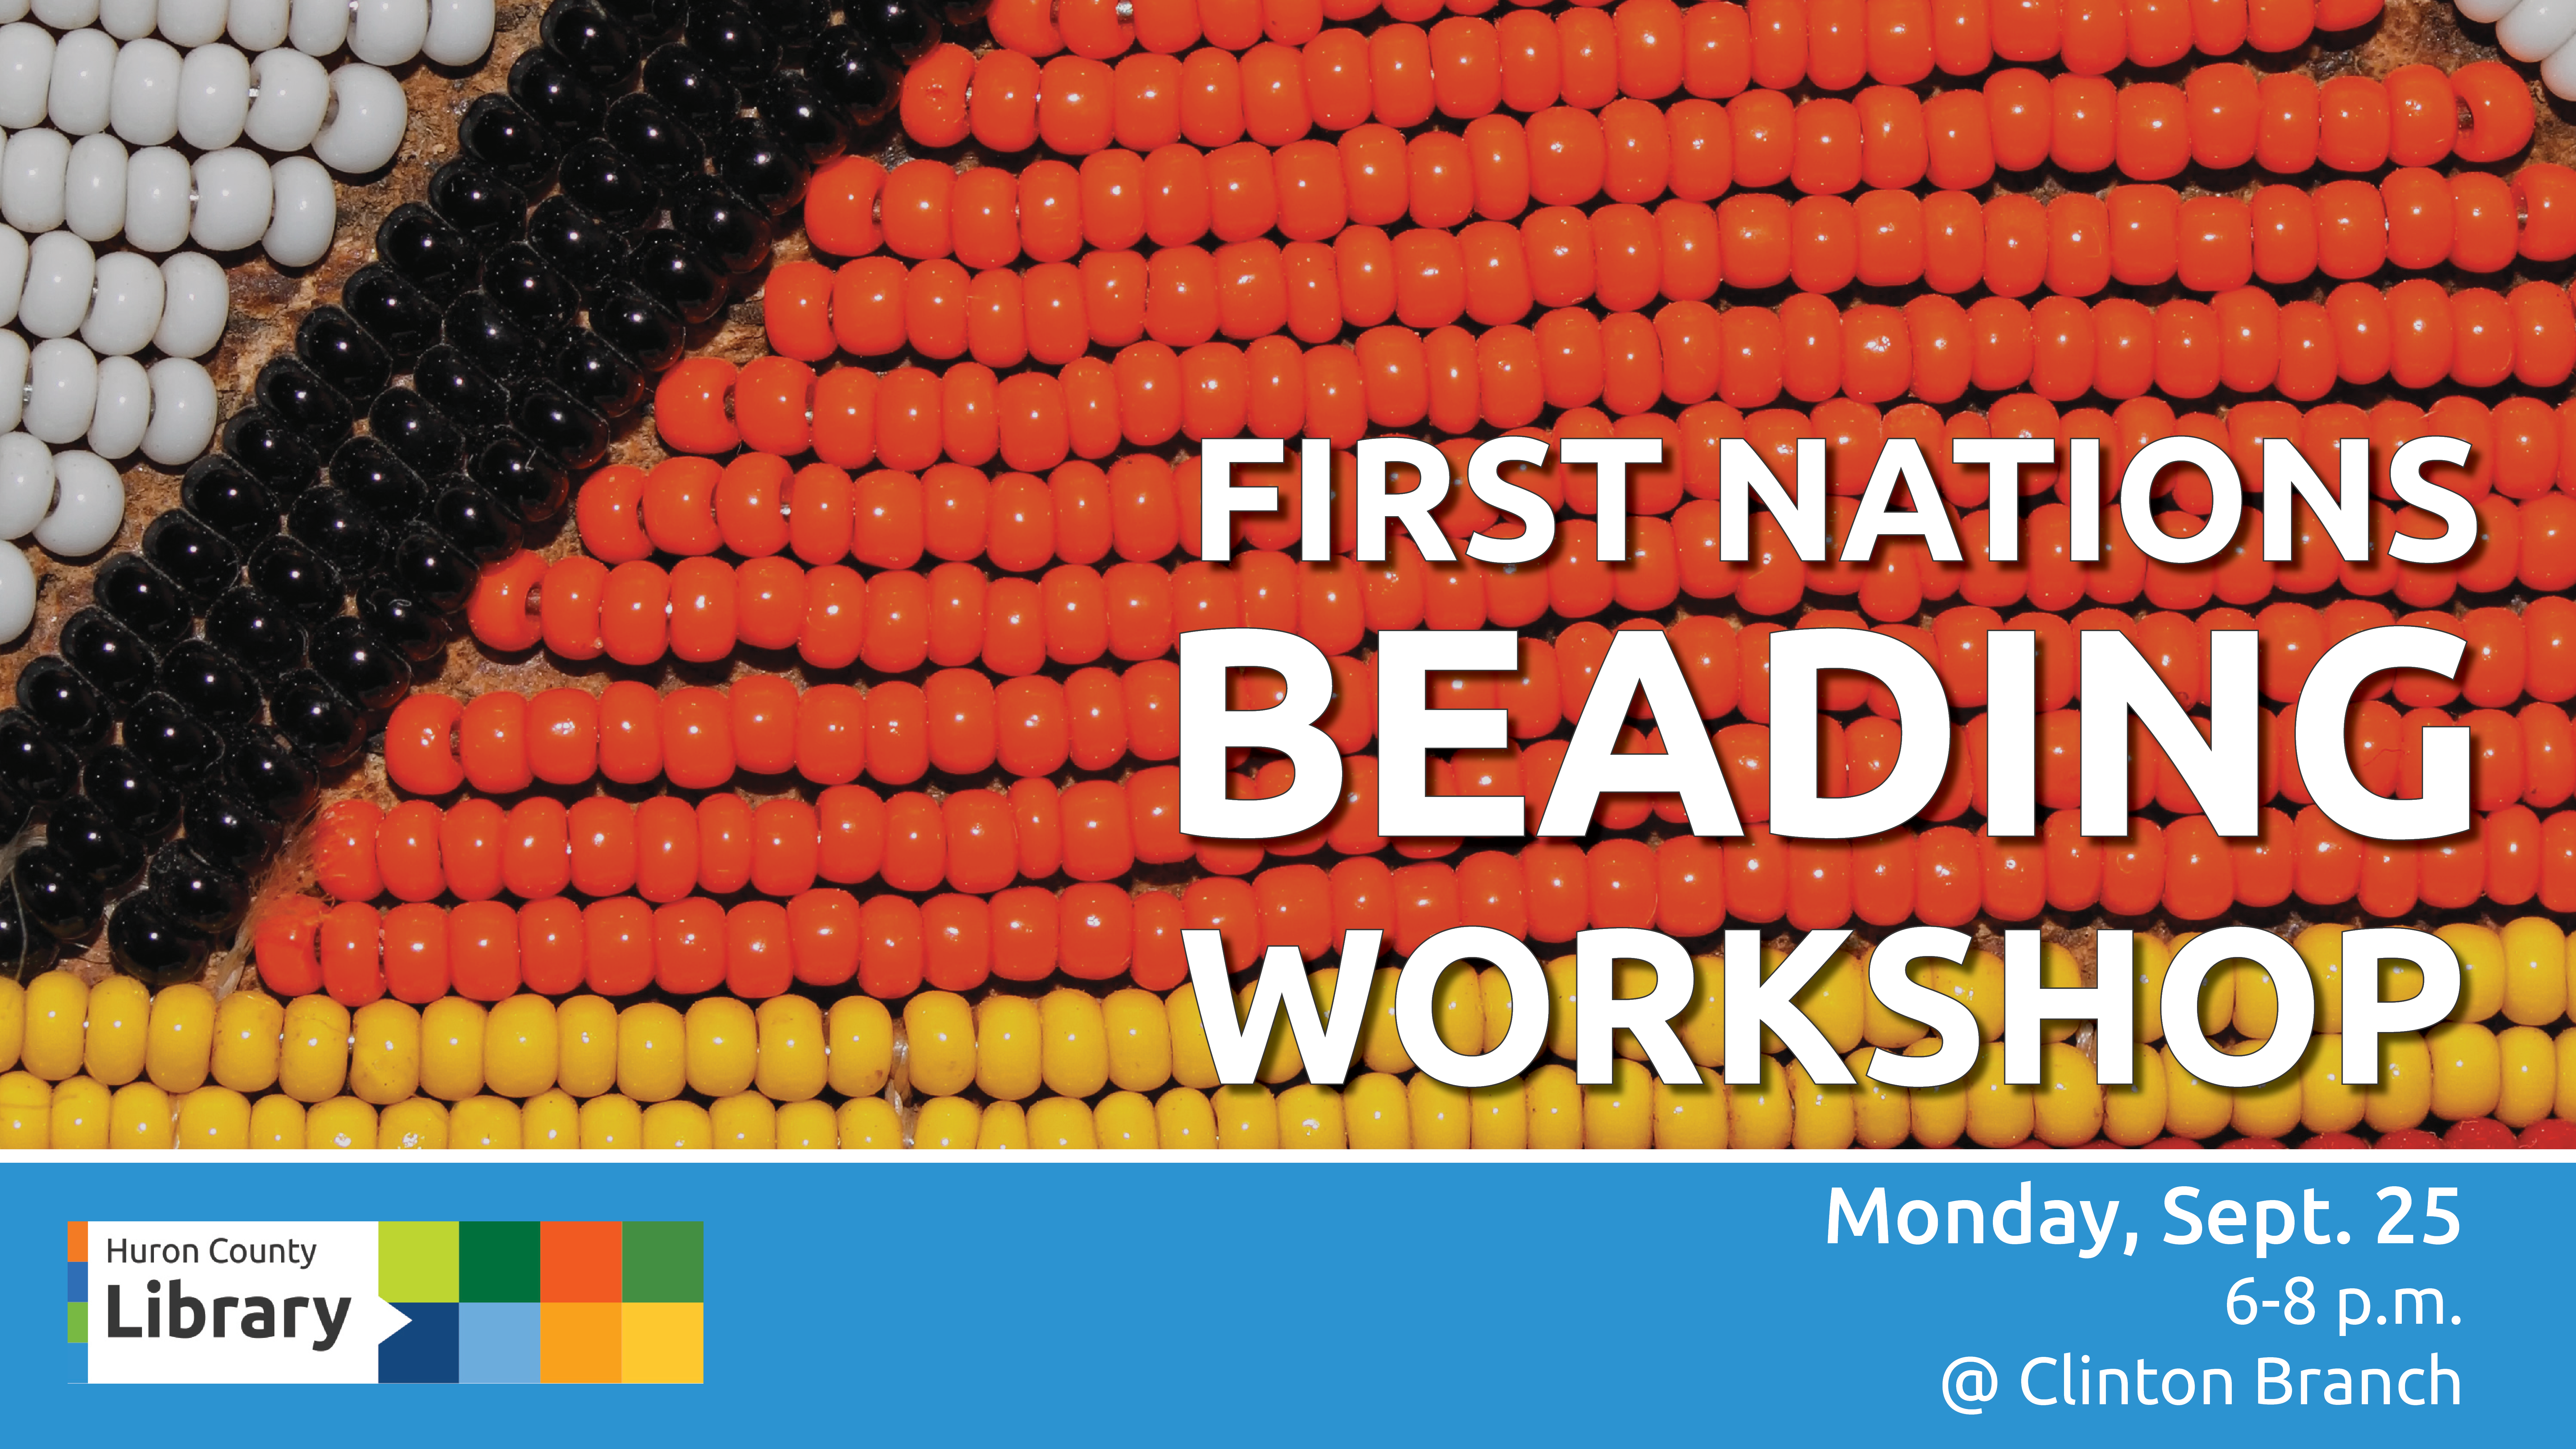 Close-up photo of white, black, red and yellow beads with text promoting First Nations Beading Workshop at Clinton Branch